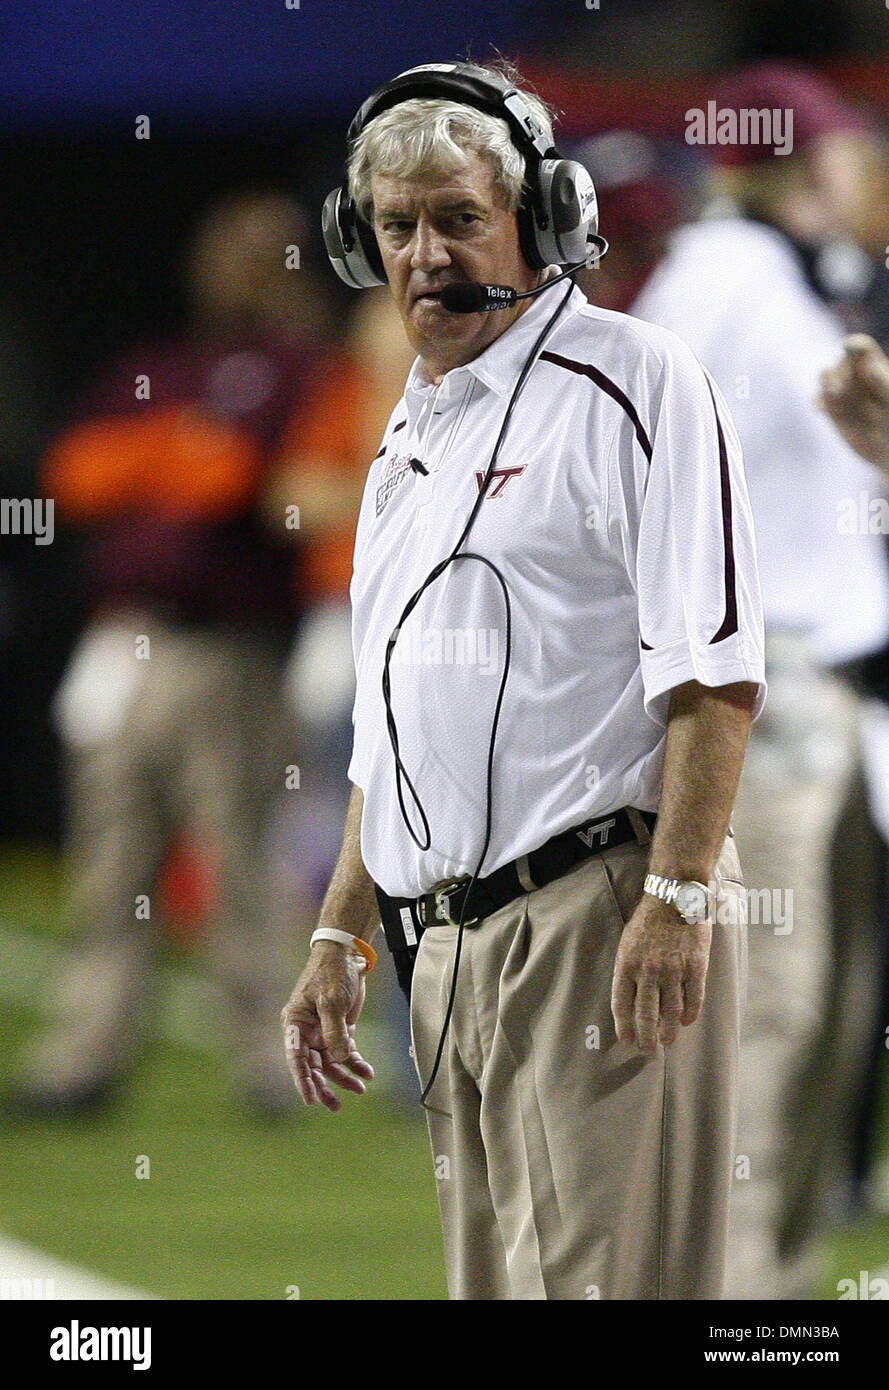 Sep 05, 2009 - Atlanta, Georgia, USA - NCAA Football - Virginia Tech Head Coach FRANK BEAMER watches from the sideline during the second half of his team's loss to Alabama in the Georgia Dome. (Credit Image: © Josh D. Weiss/ZUMA Press) Stock Photo